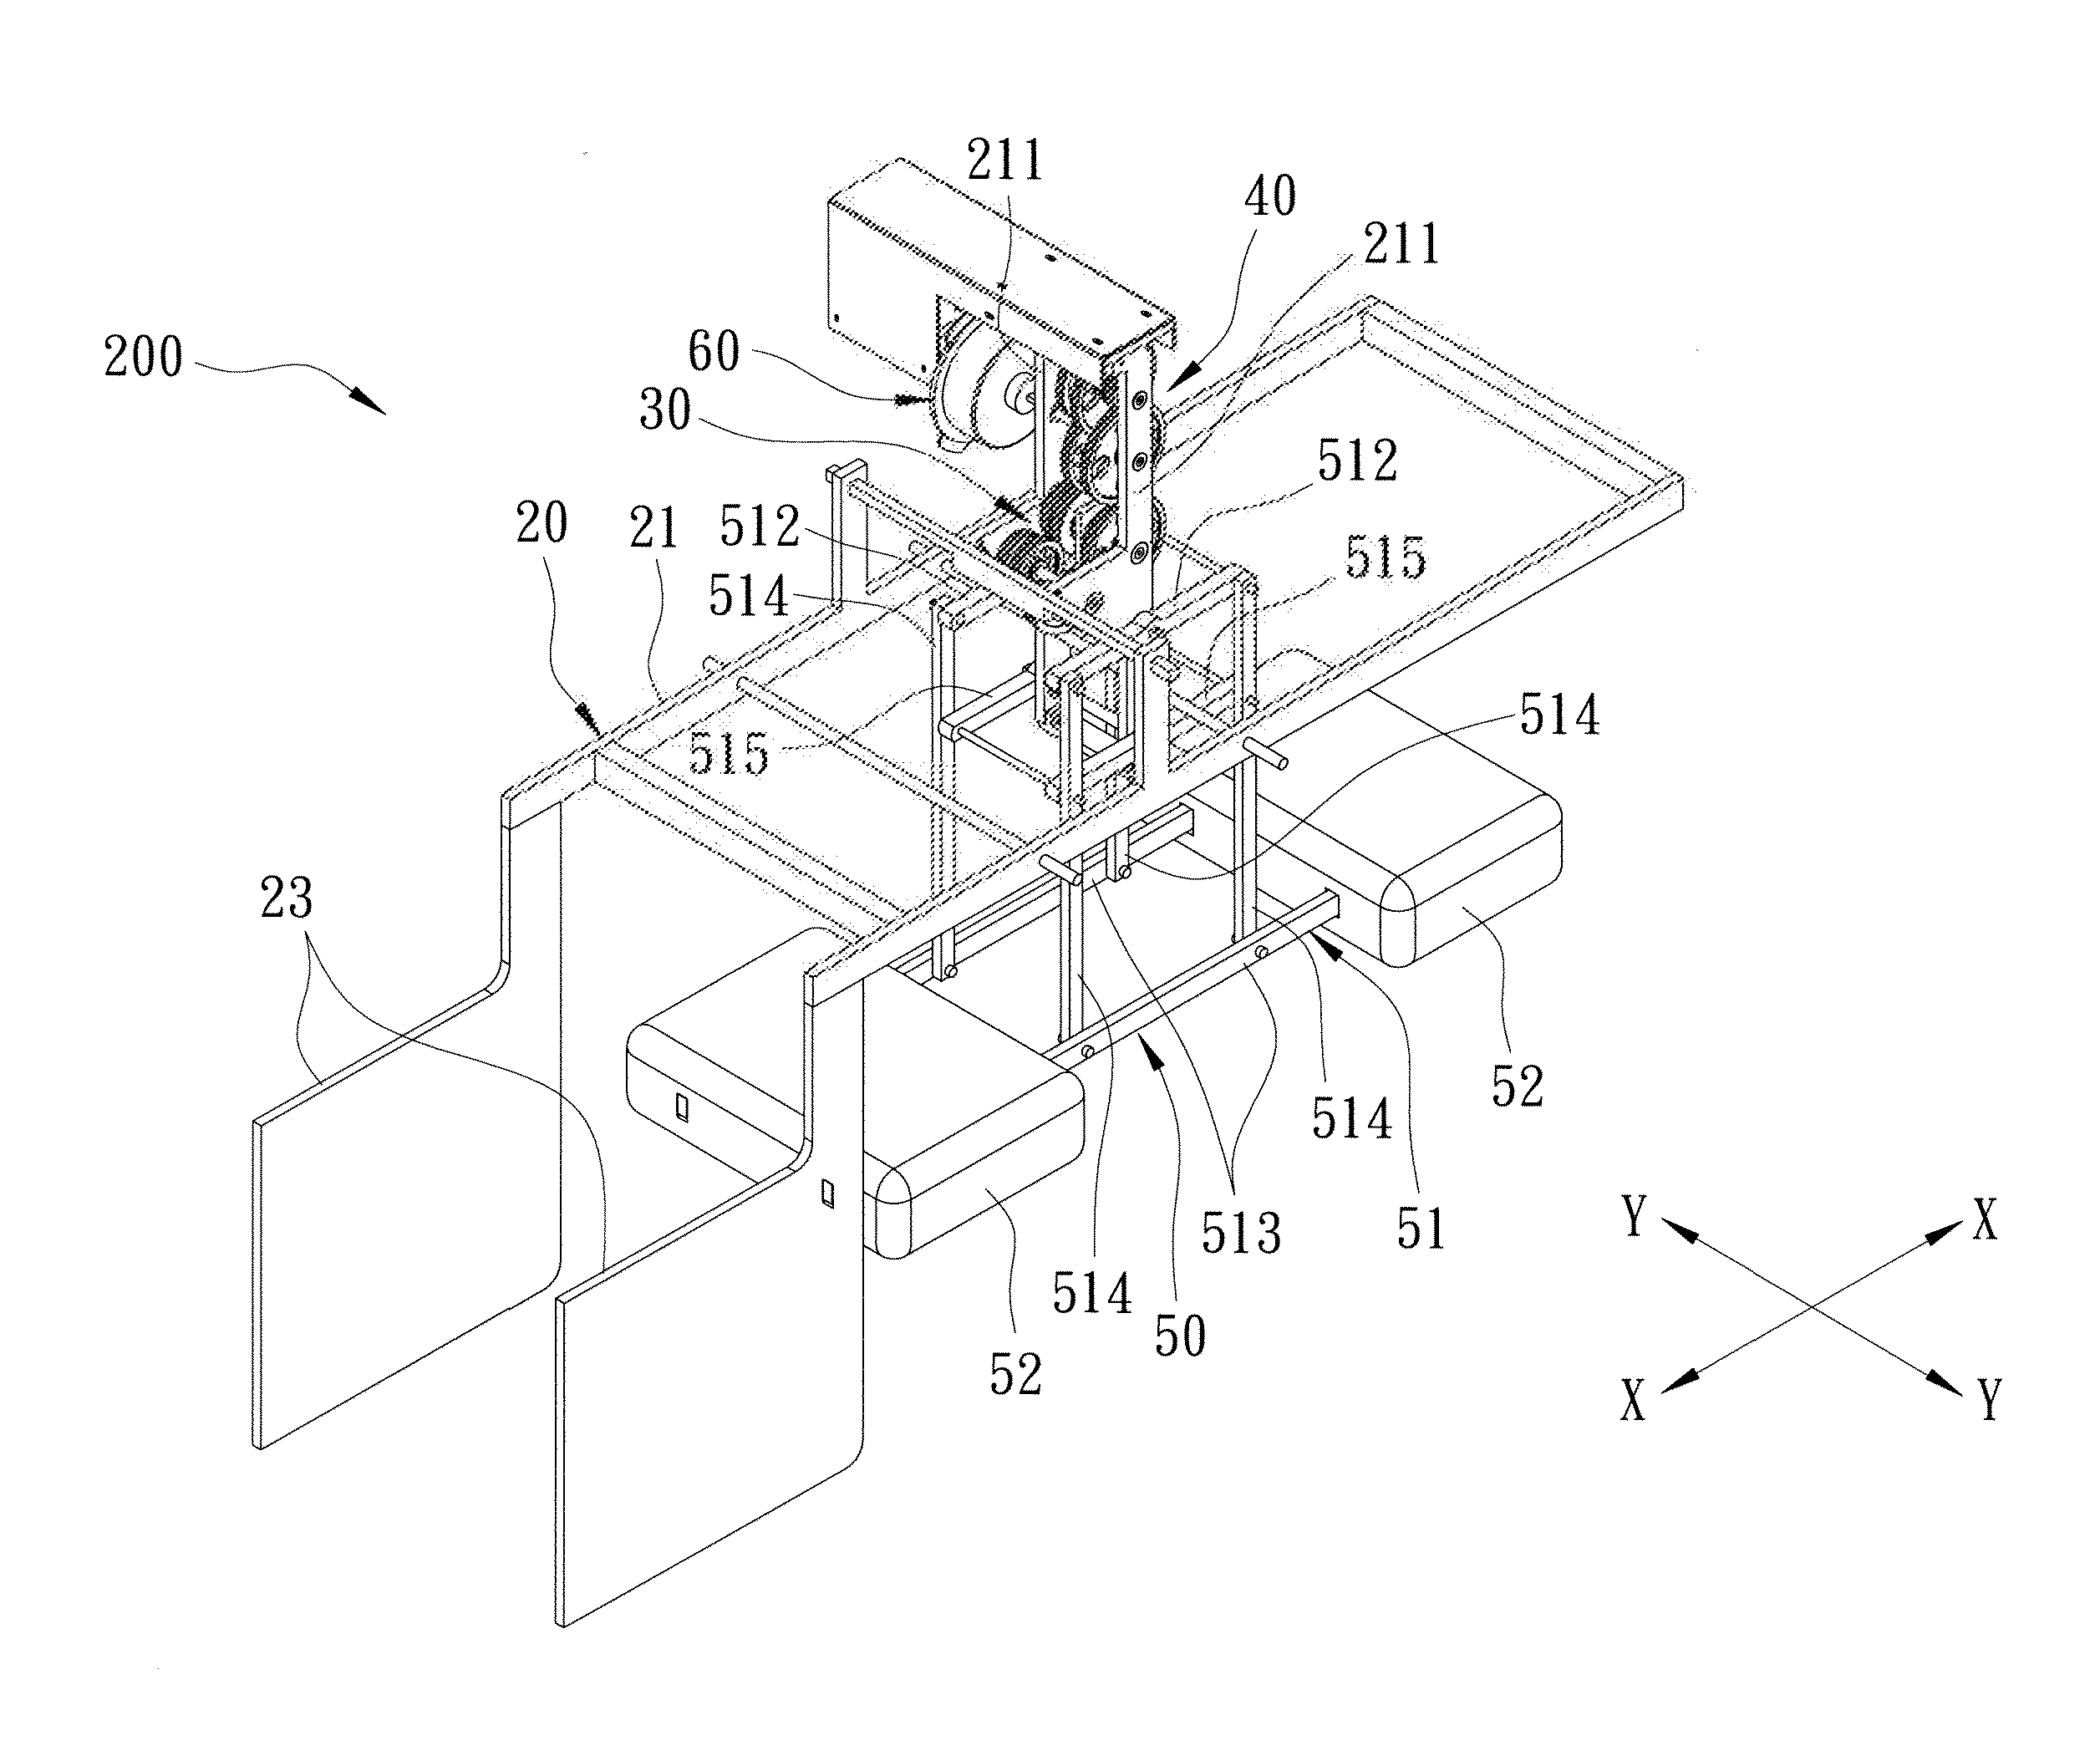 Apparatus for generating electric power using water wave energy